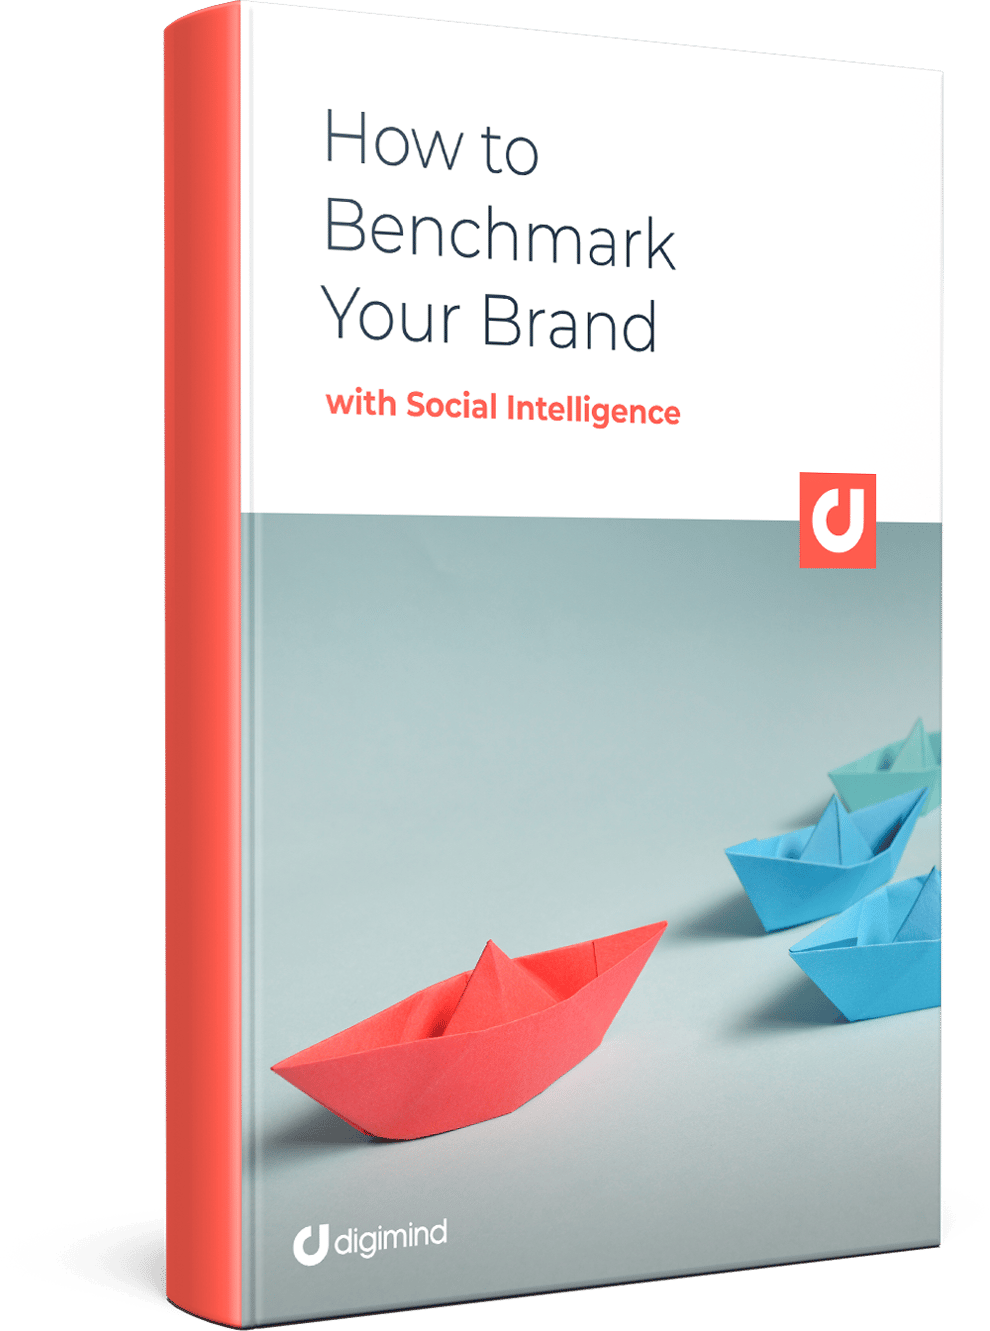 APAC-How to Benchmark Your Brand with Social Media Intelligence_3D BOOK